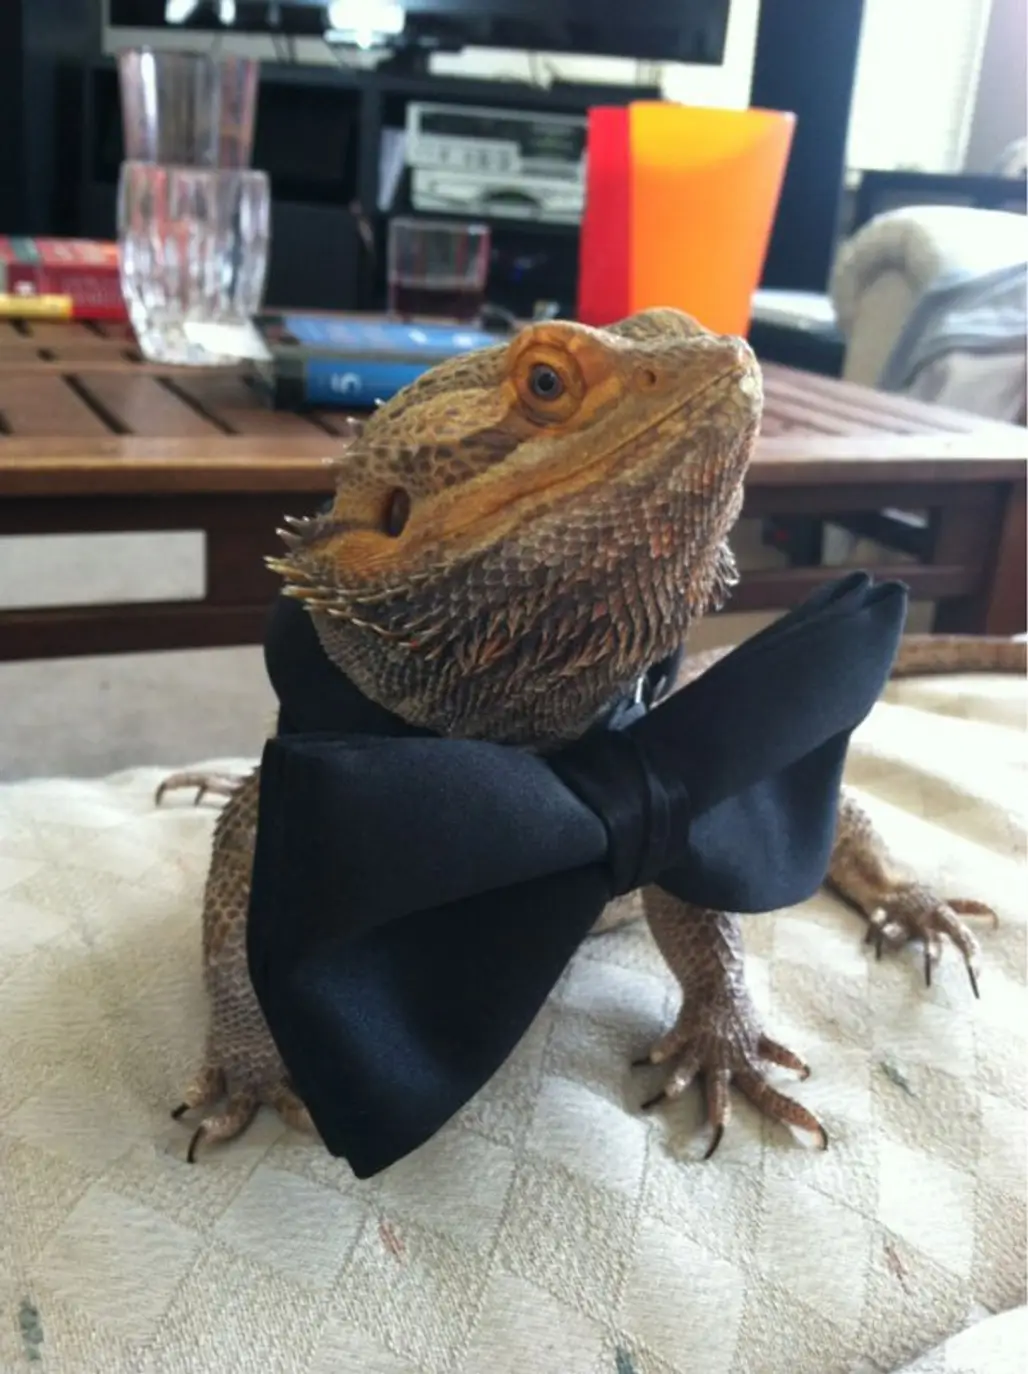 Who Says Reptiles Can't Be Cute?